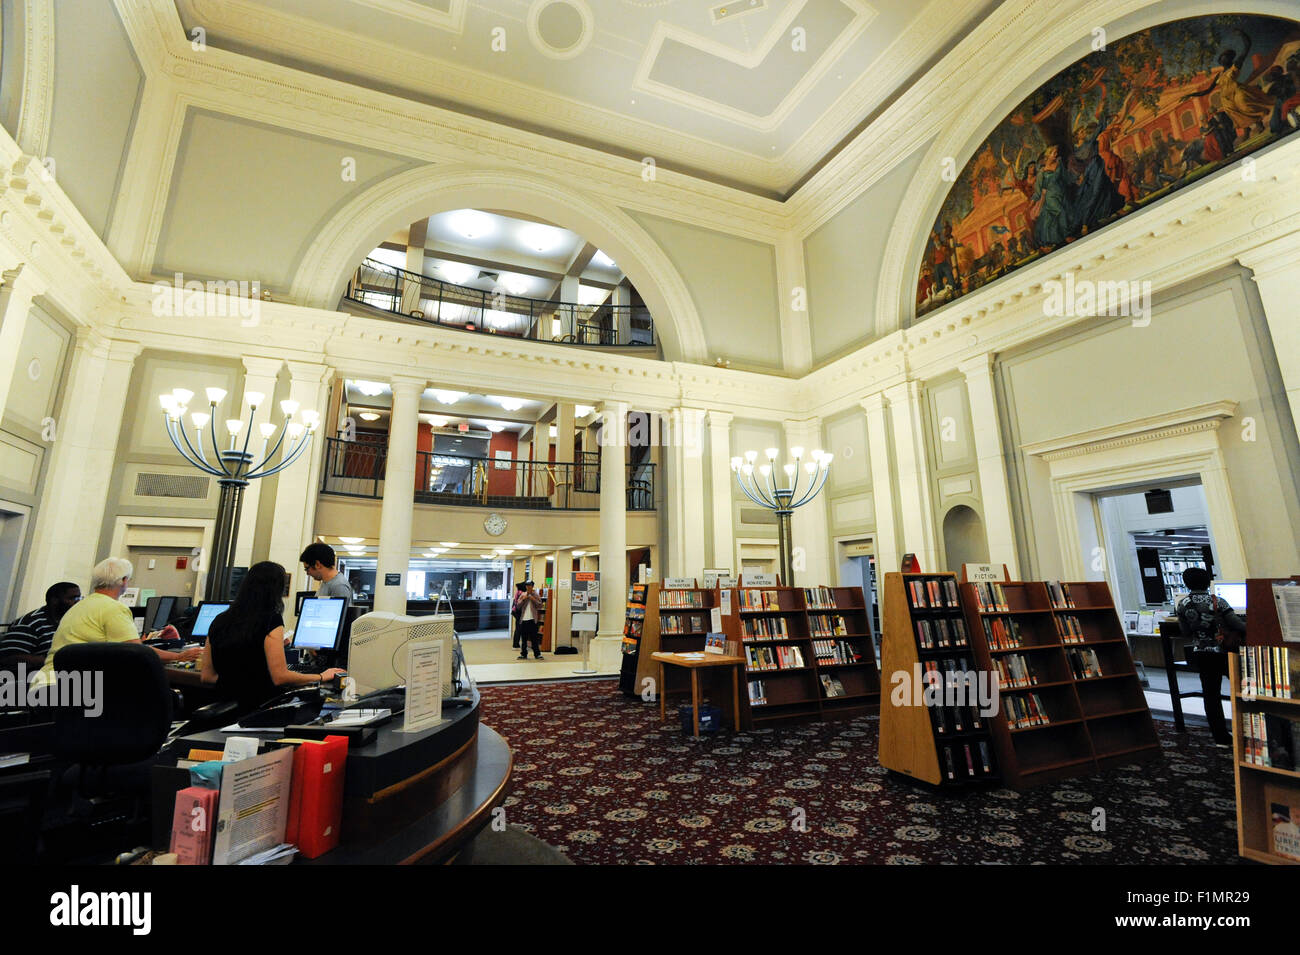 New Haven Free Public Library, New Haven, Connecticut. Lunette mural designed by Bancel La Farge and painted by Deane Keller. Stock Photo